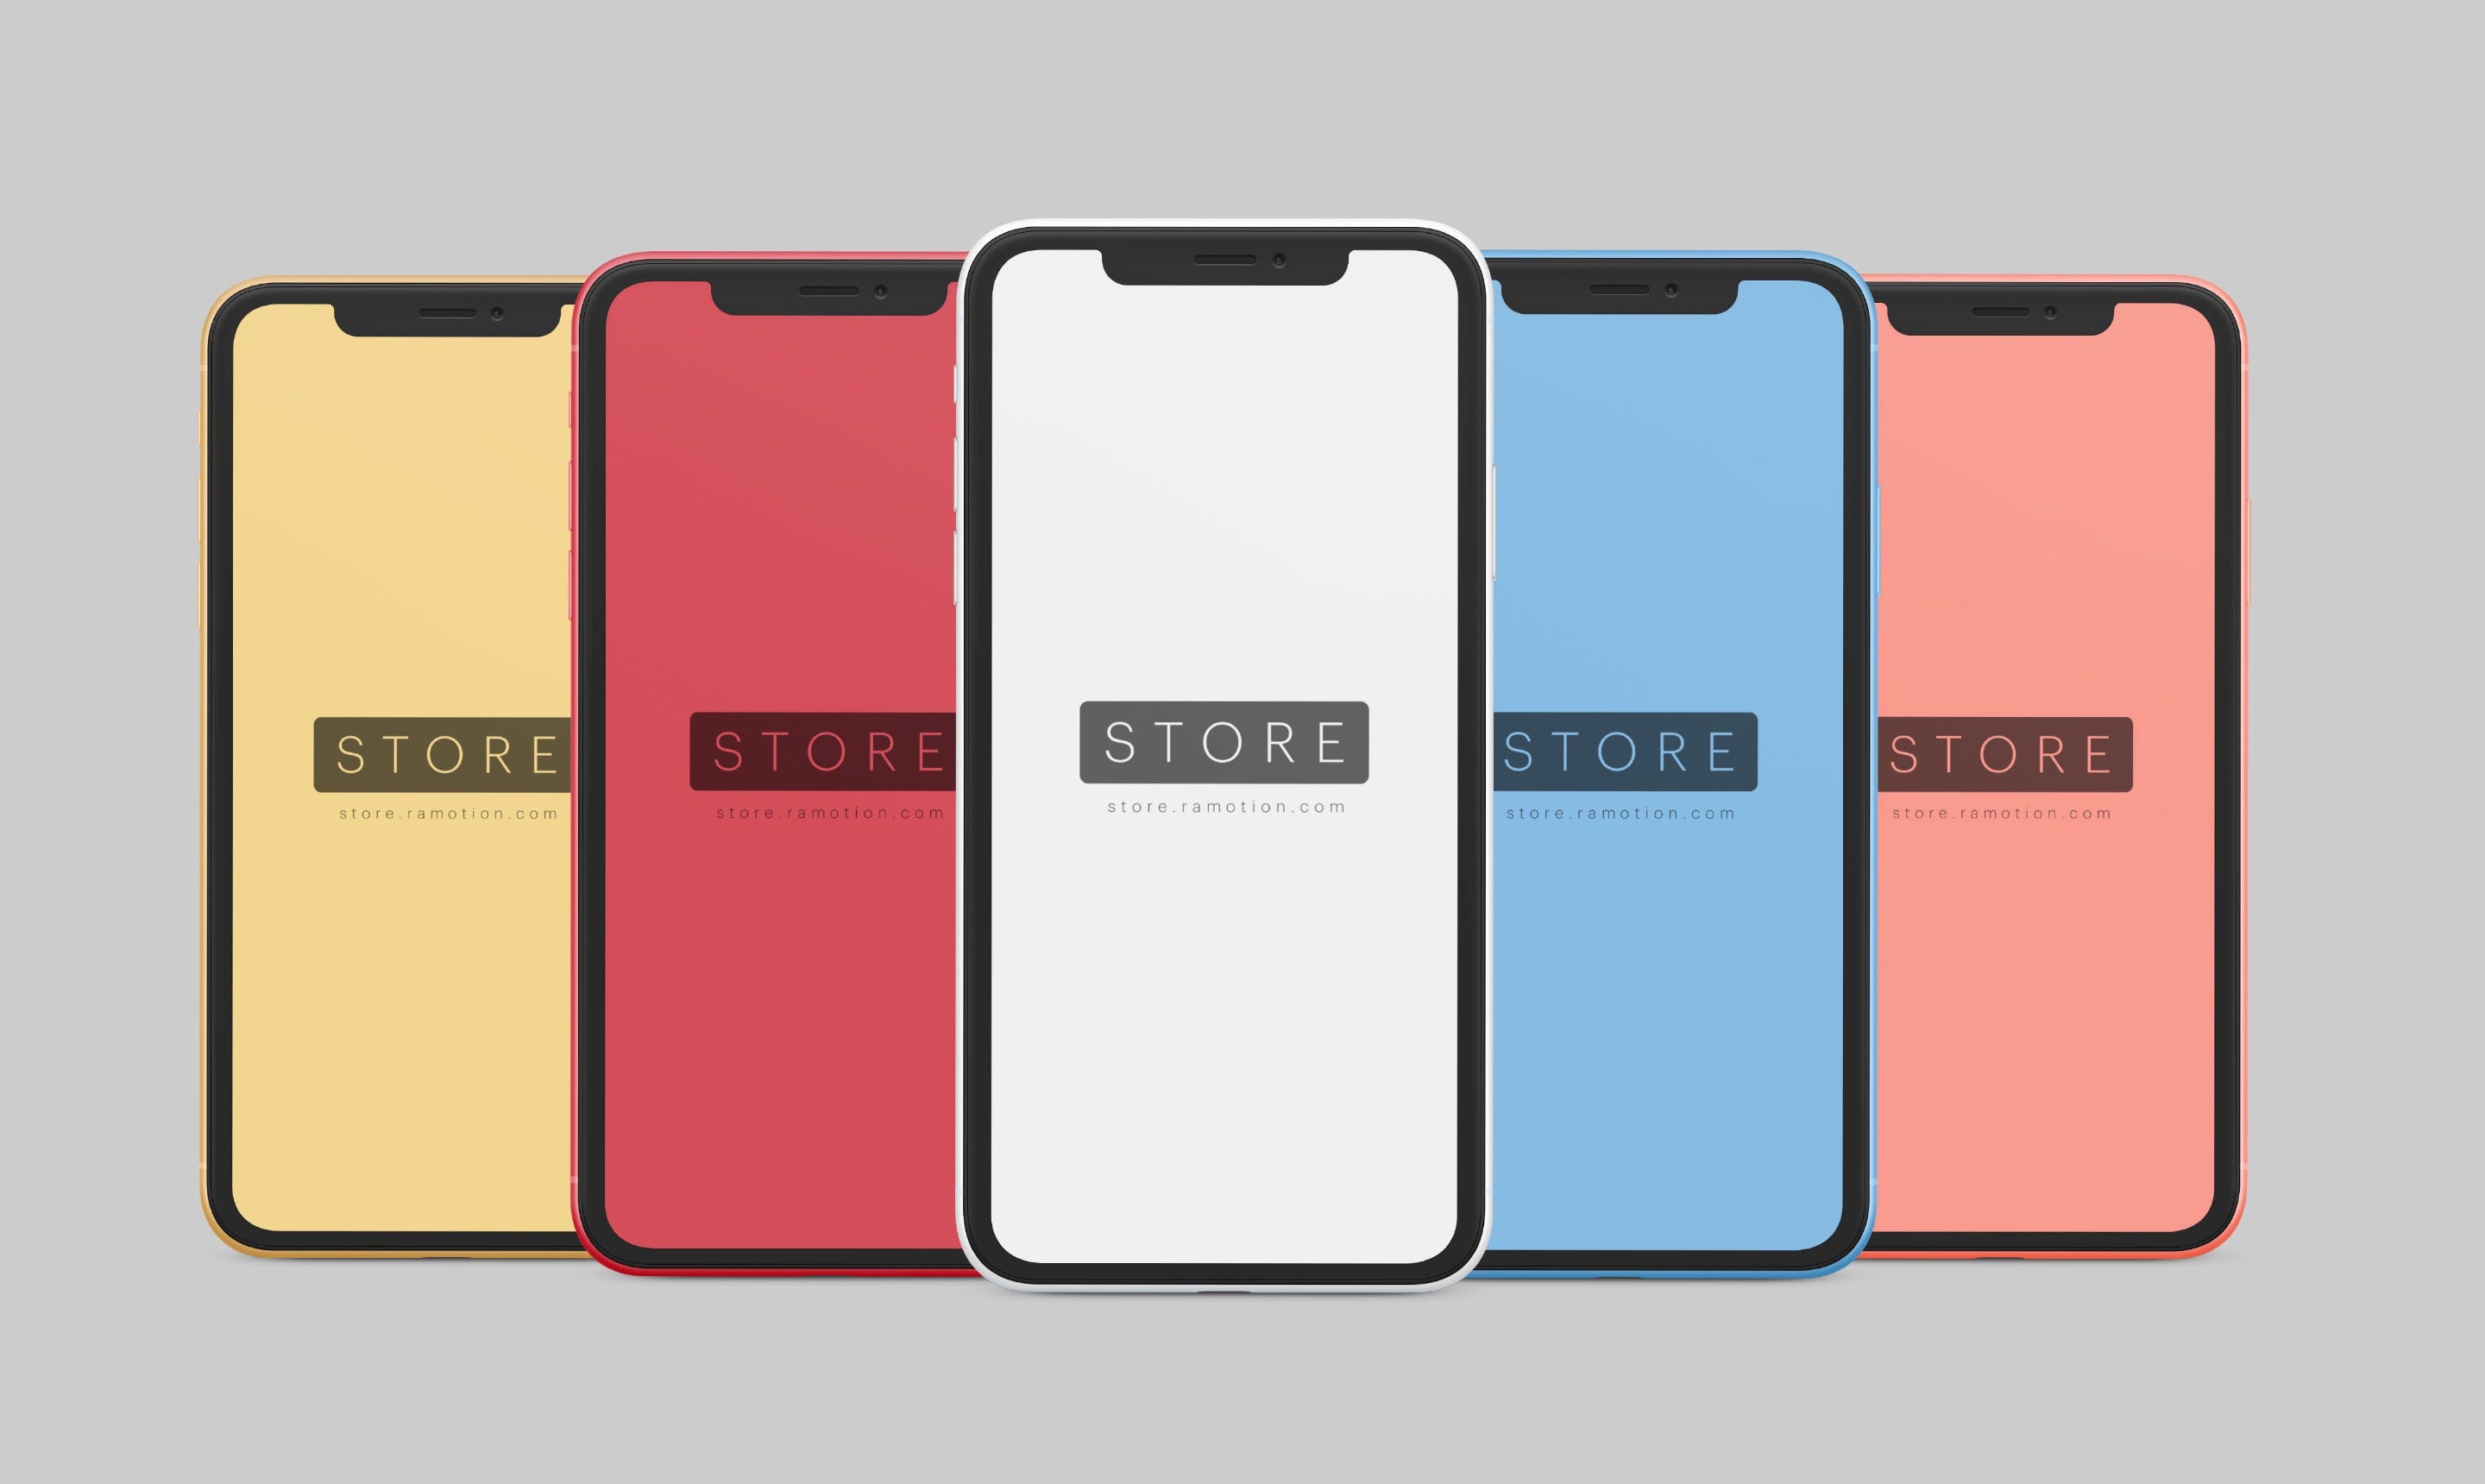 Download Free iPhone Mockups PSD, Sketch - August 2020 | TMDesign